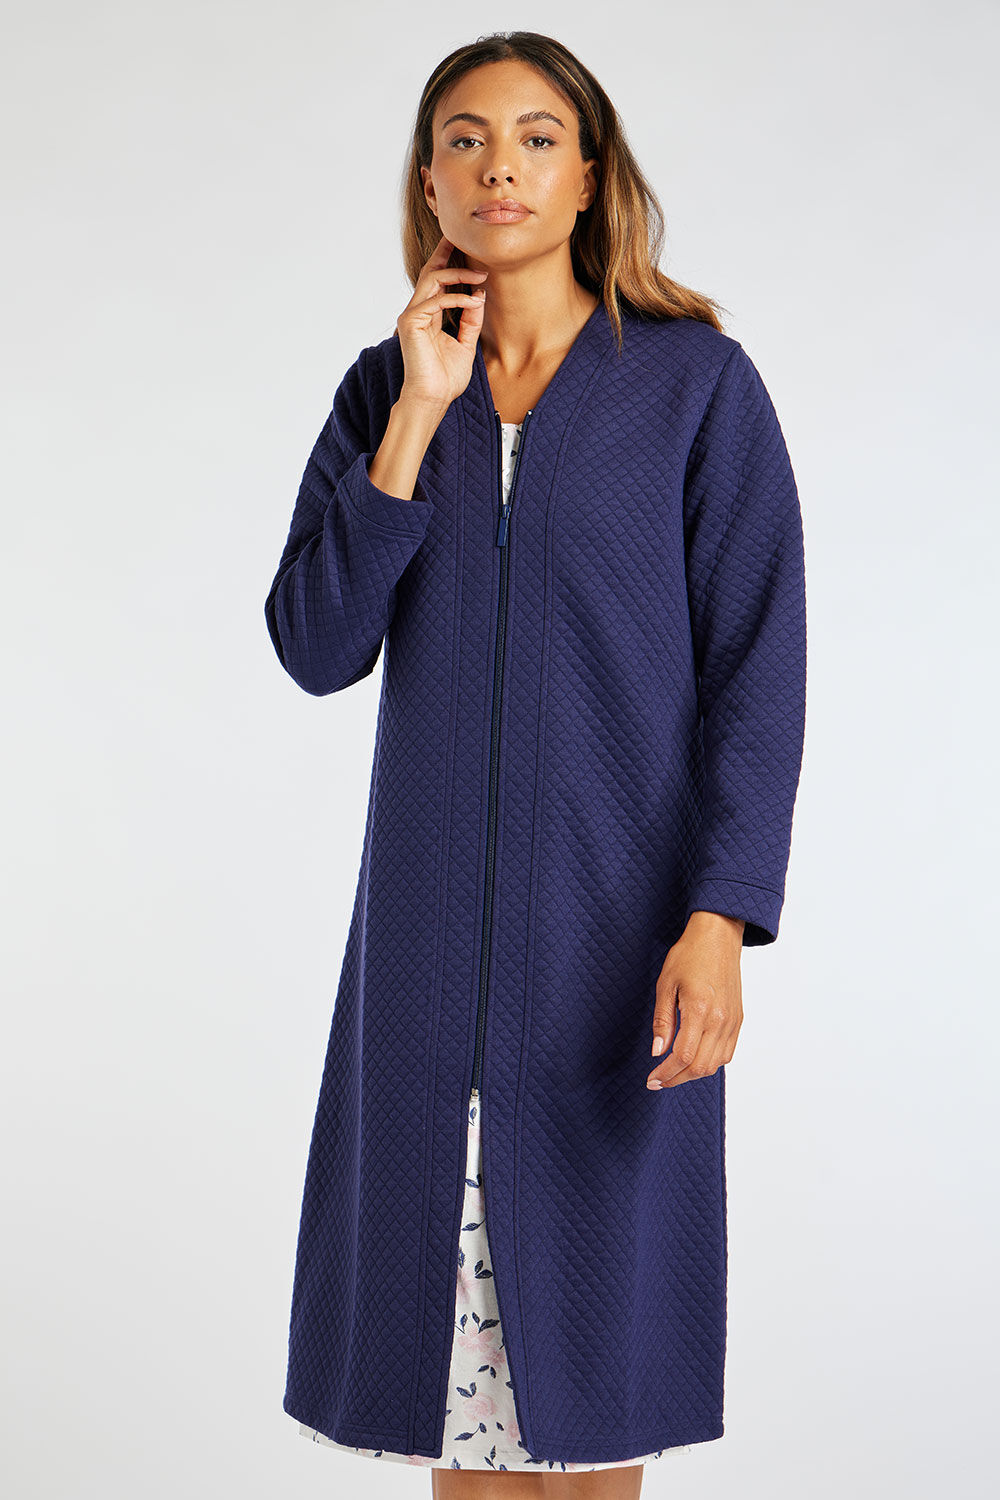 Bonmarche Navy Diamond Quilted Robe With Zip Through Fastening, Size: 20-22